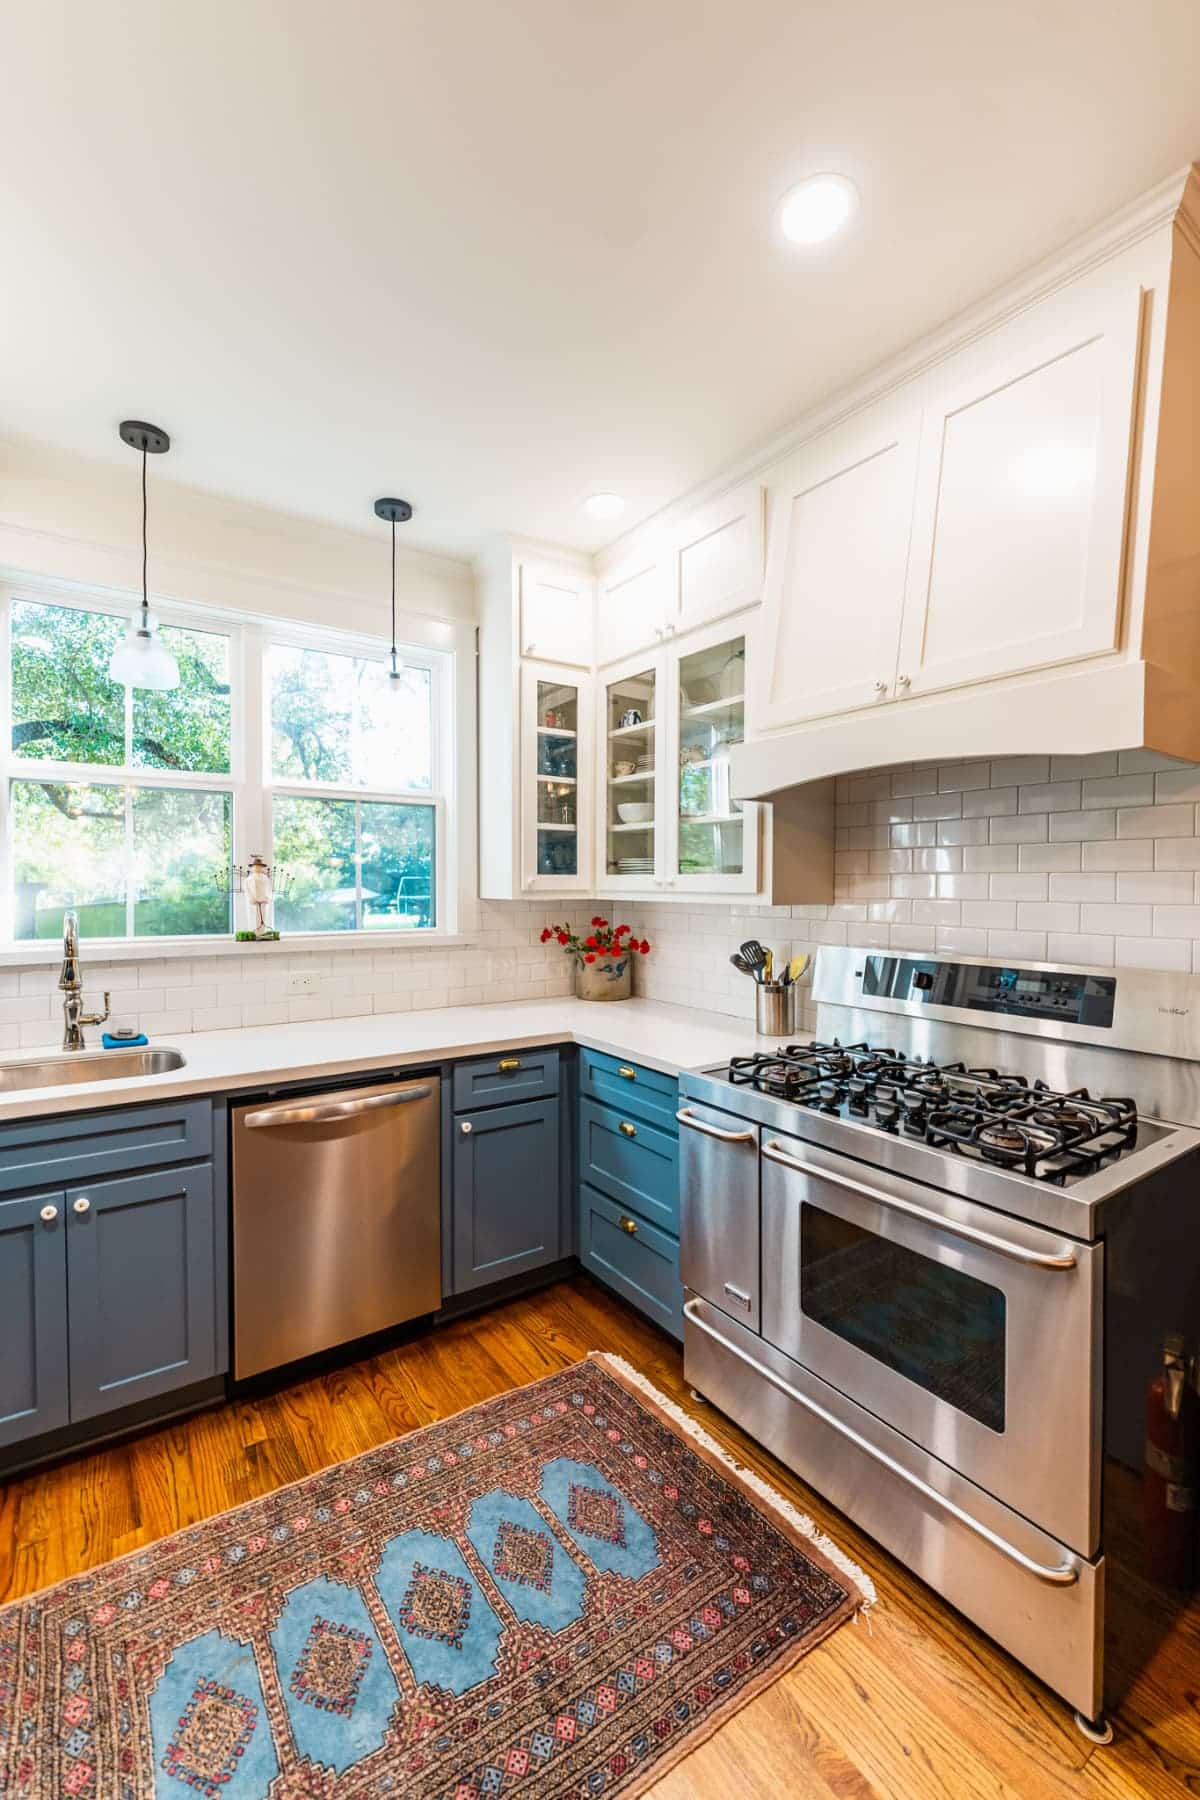 Full kitchen inside the cottage with stainless steel appliances and blue cabinets